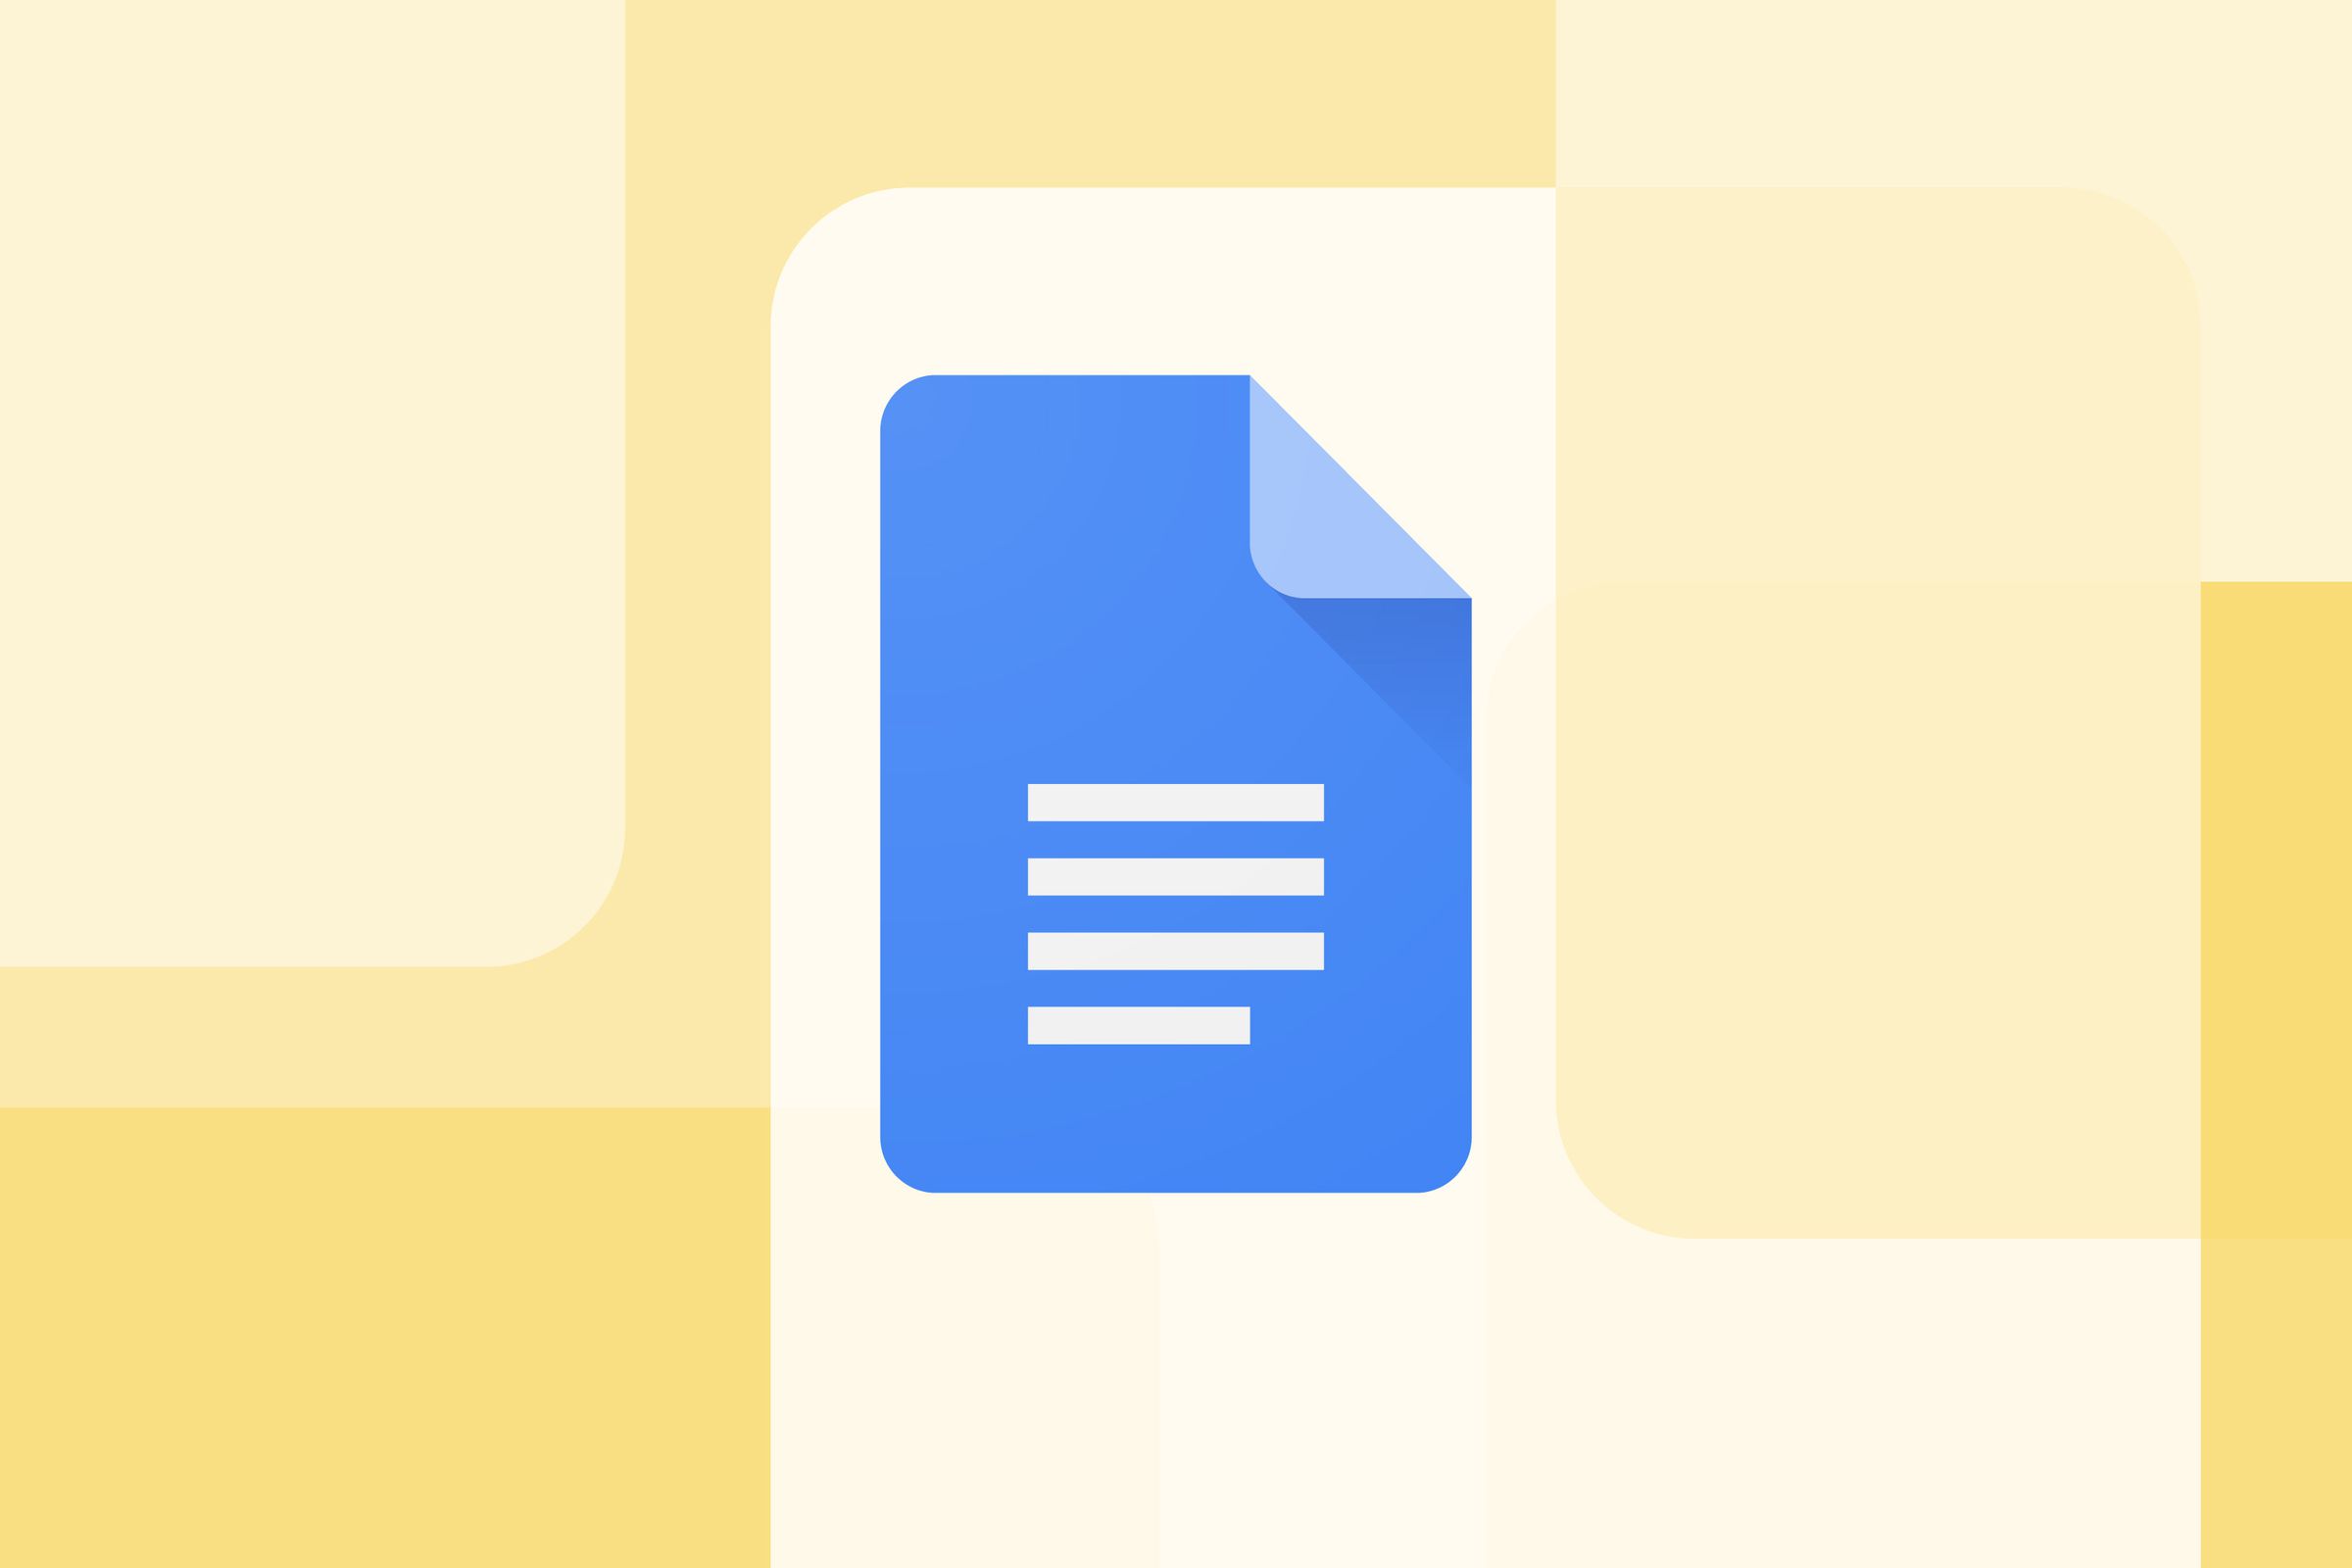 An image showing the Google Docs logo on a yellow background